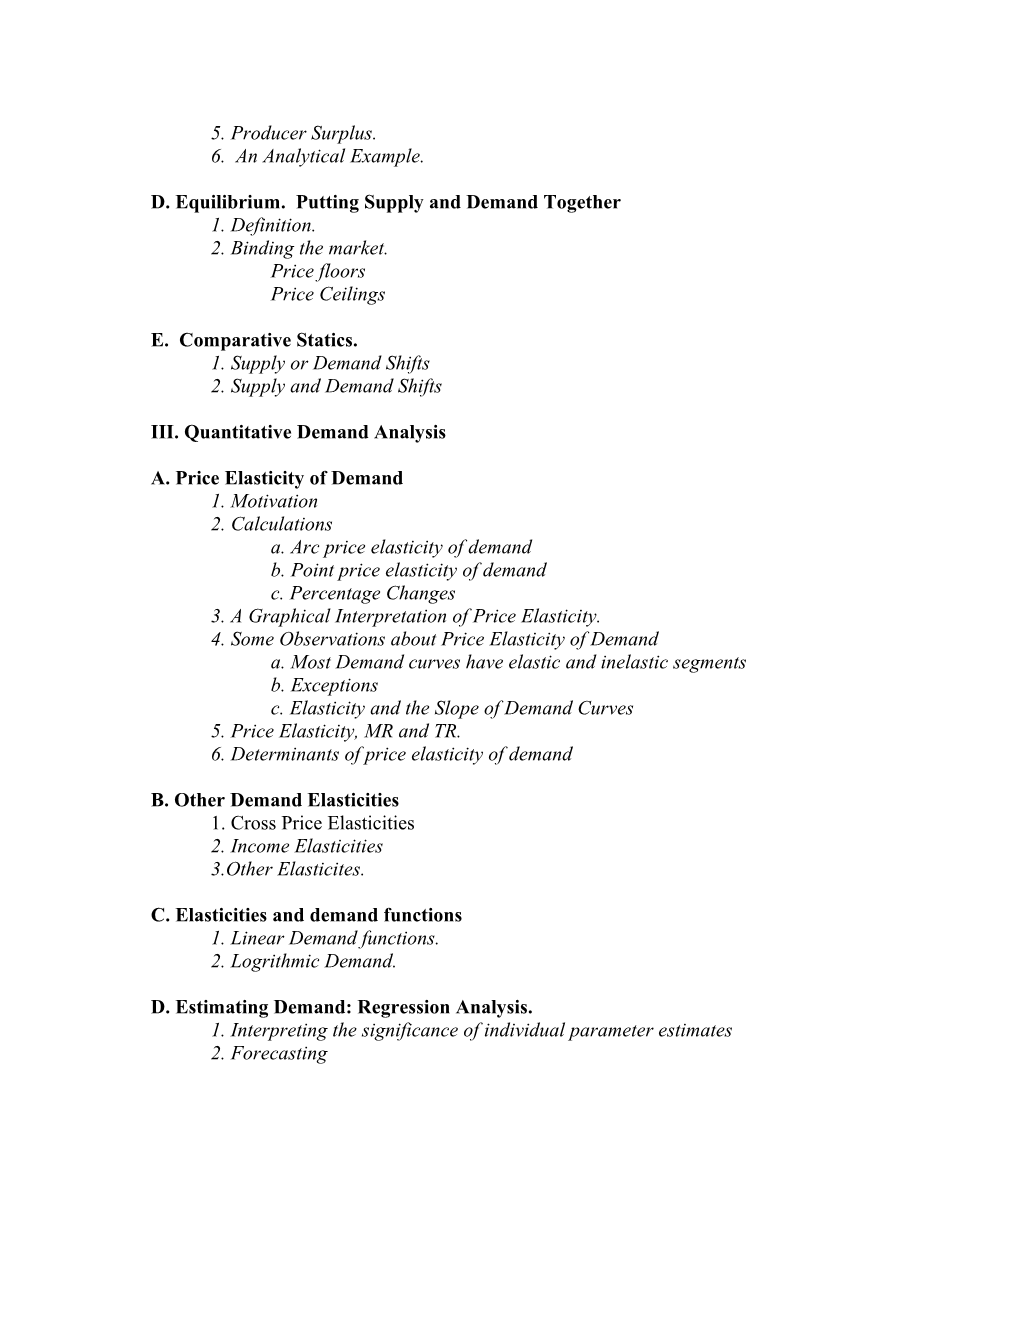 Review Outline for Final Examination